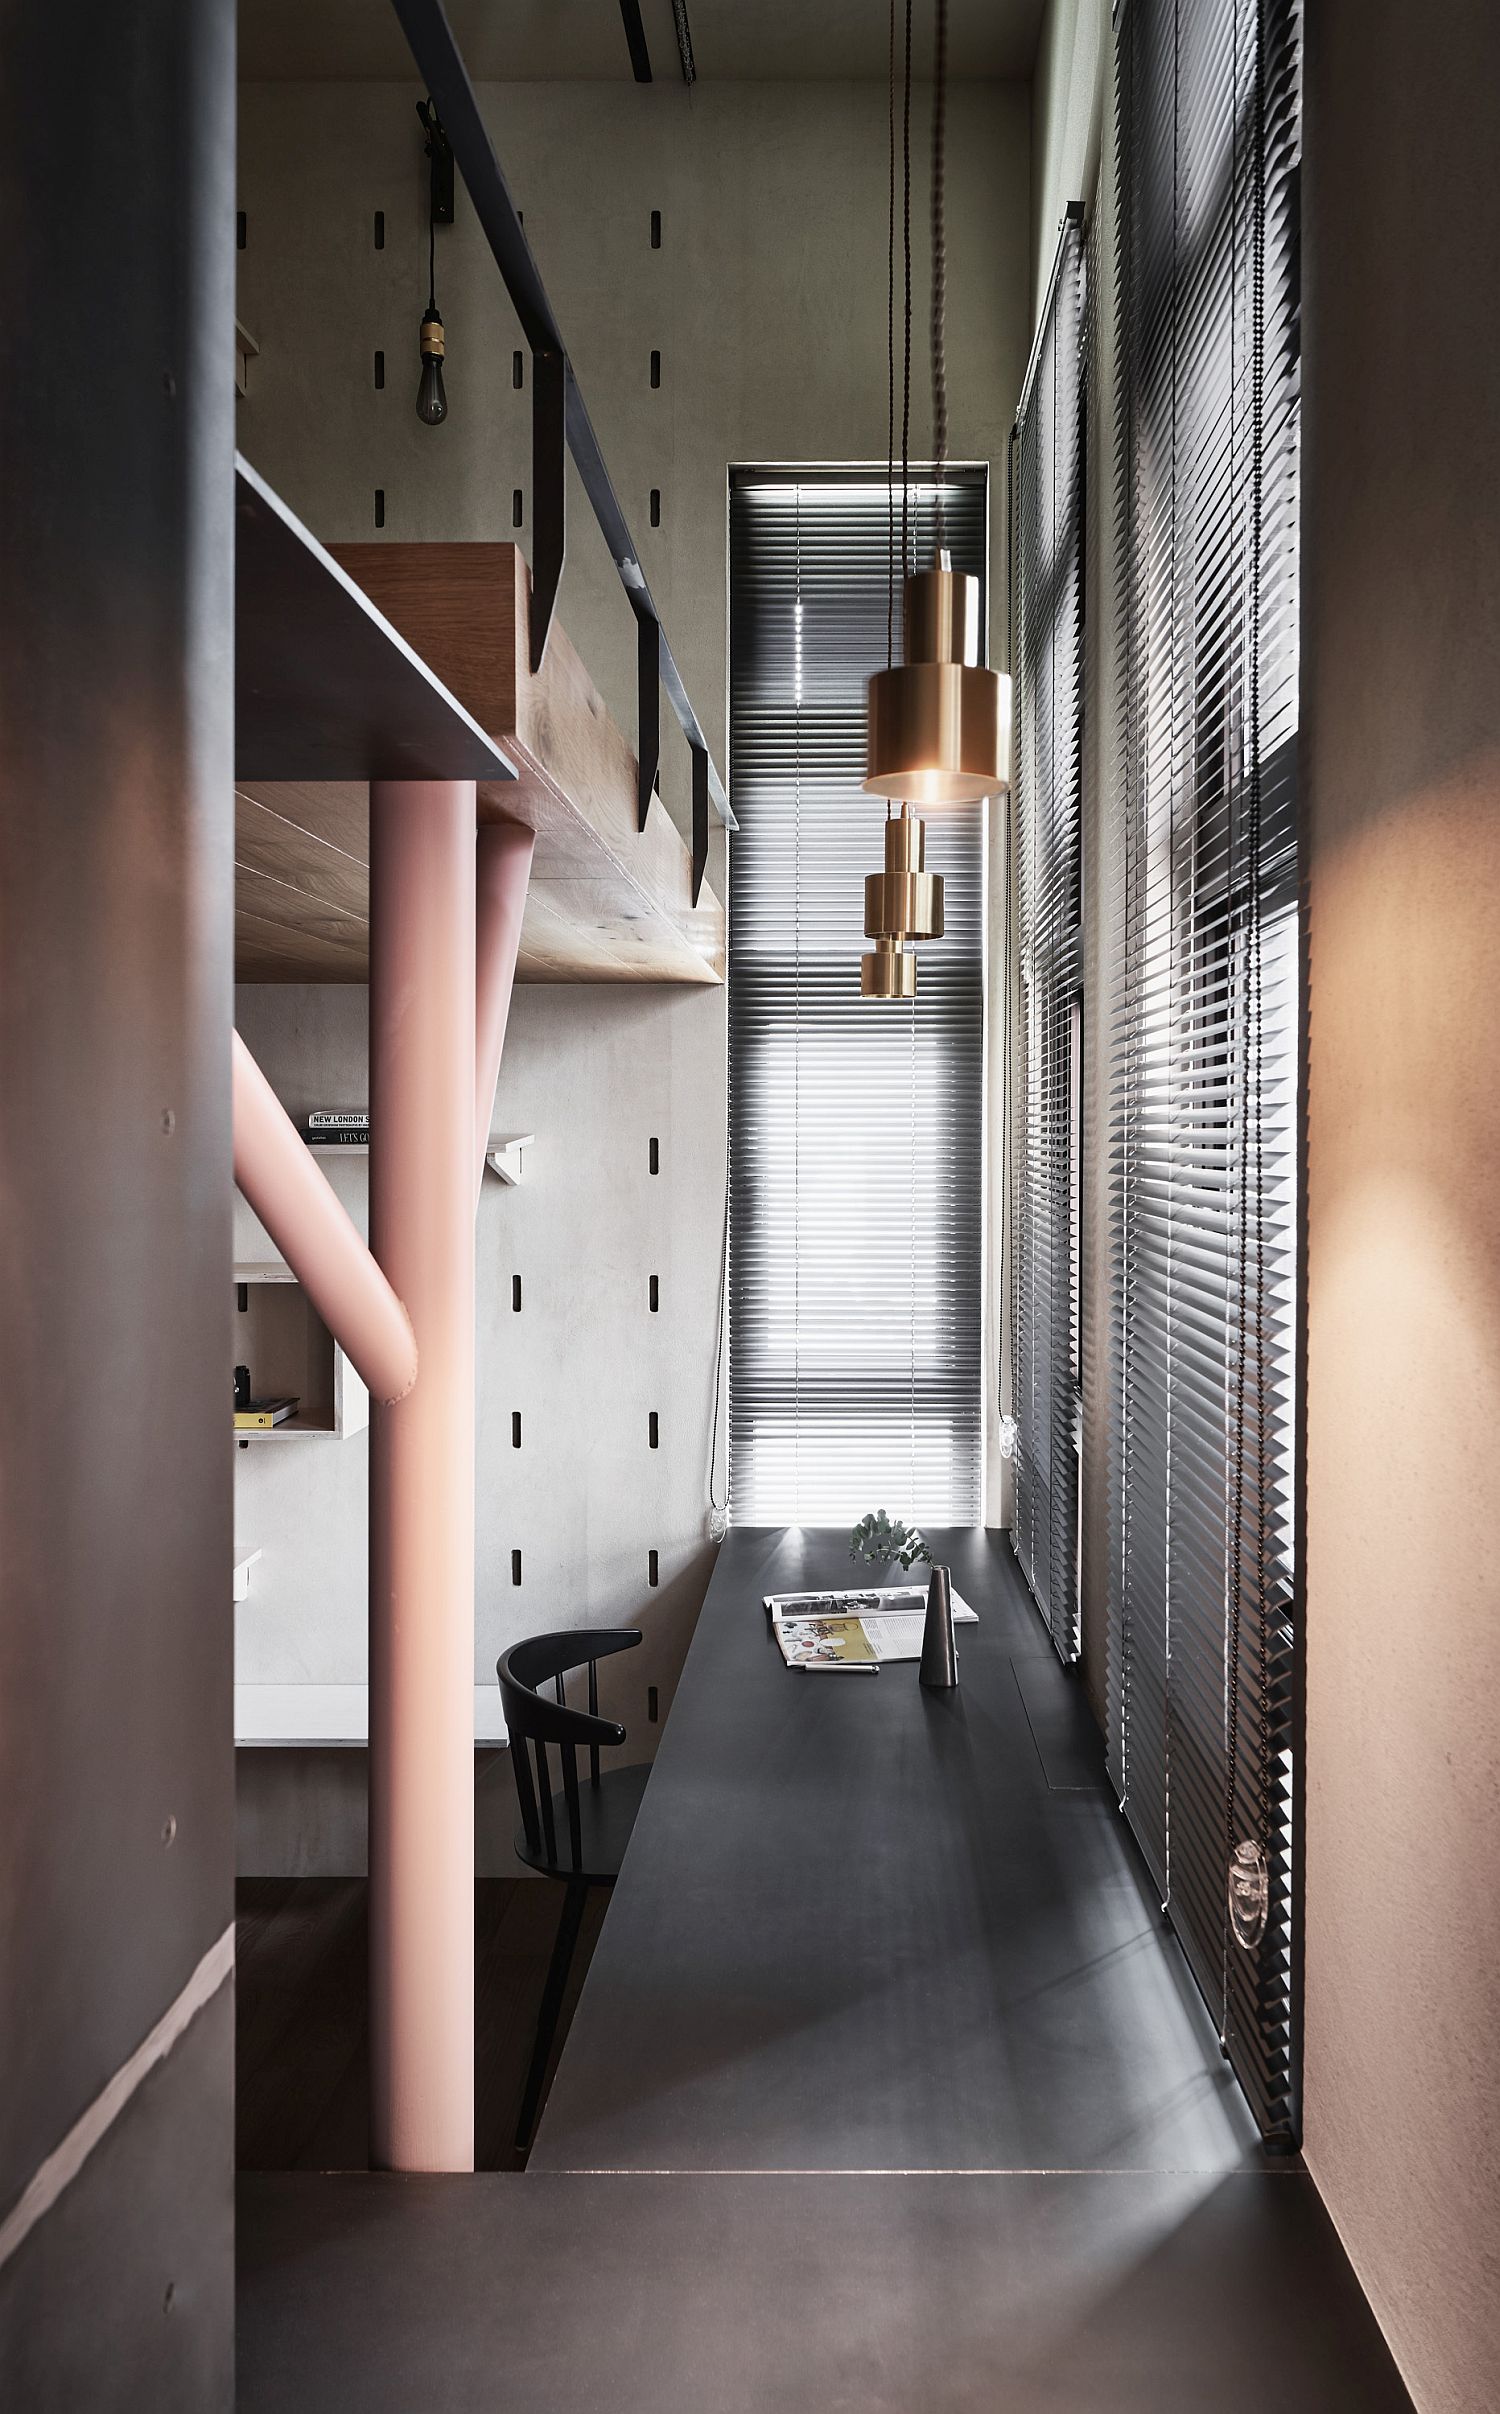 Making-use-of-the-vertical-space-inside-the-small-apartment